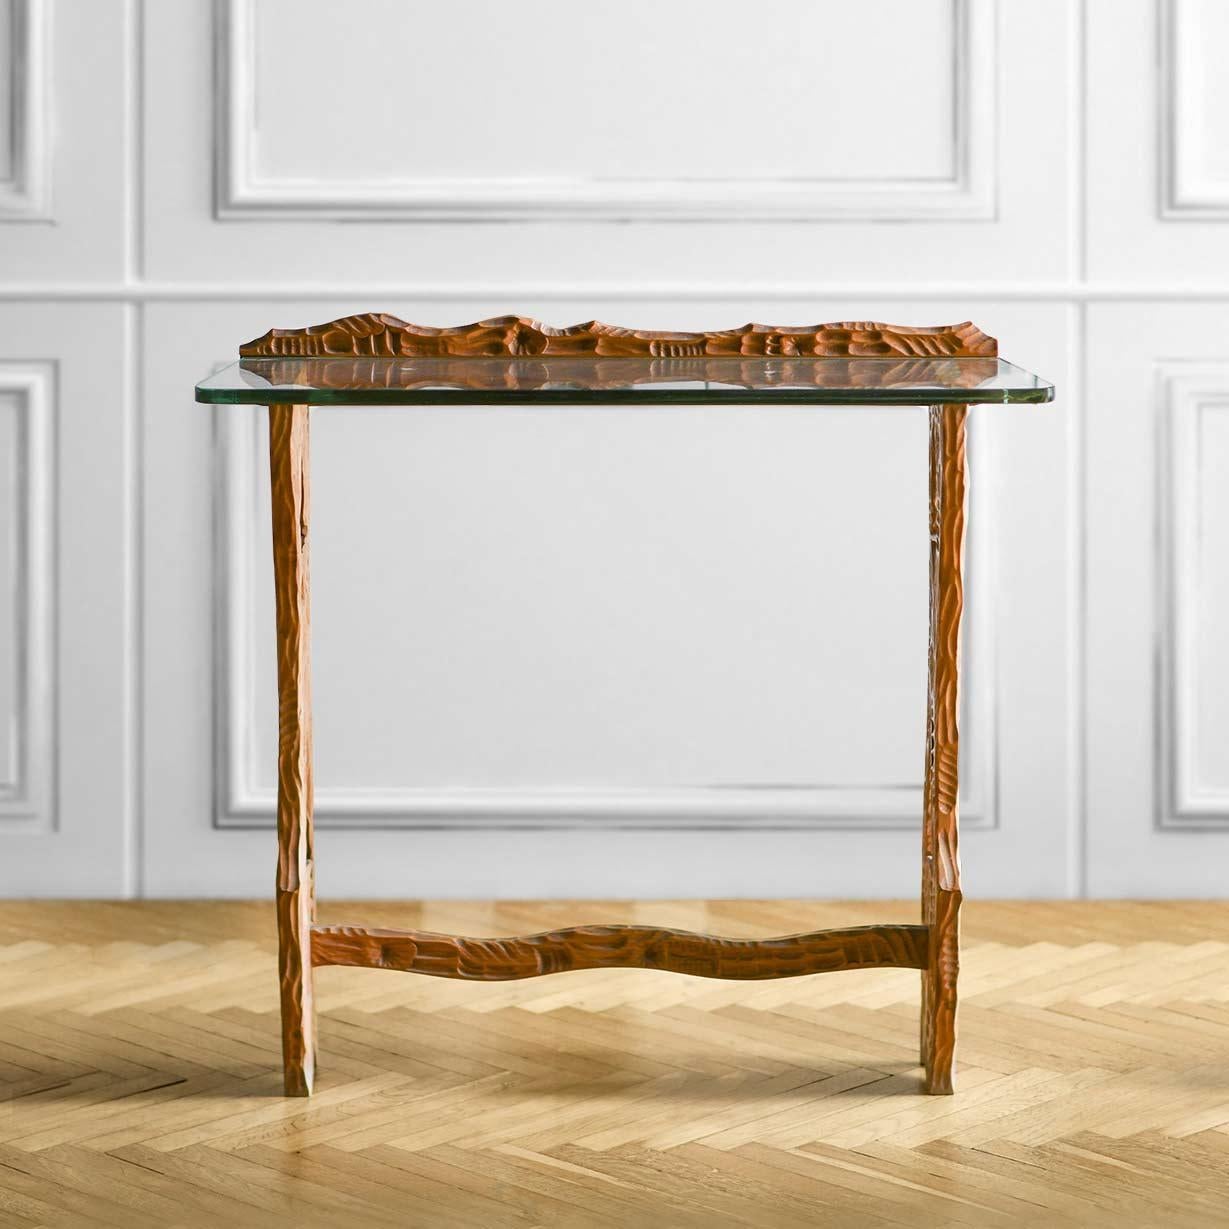 Mid-20th Century Wall Console with Carved Wooden Structure and Cut Glass Top For Sale